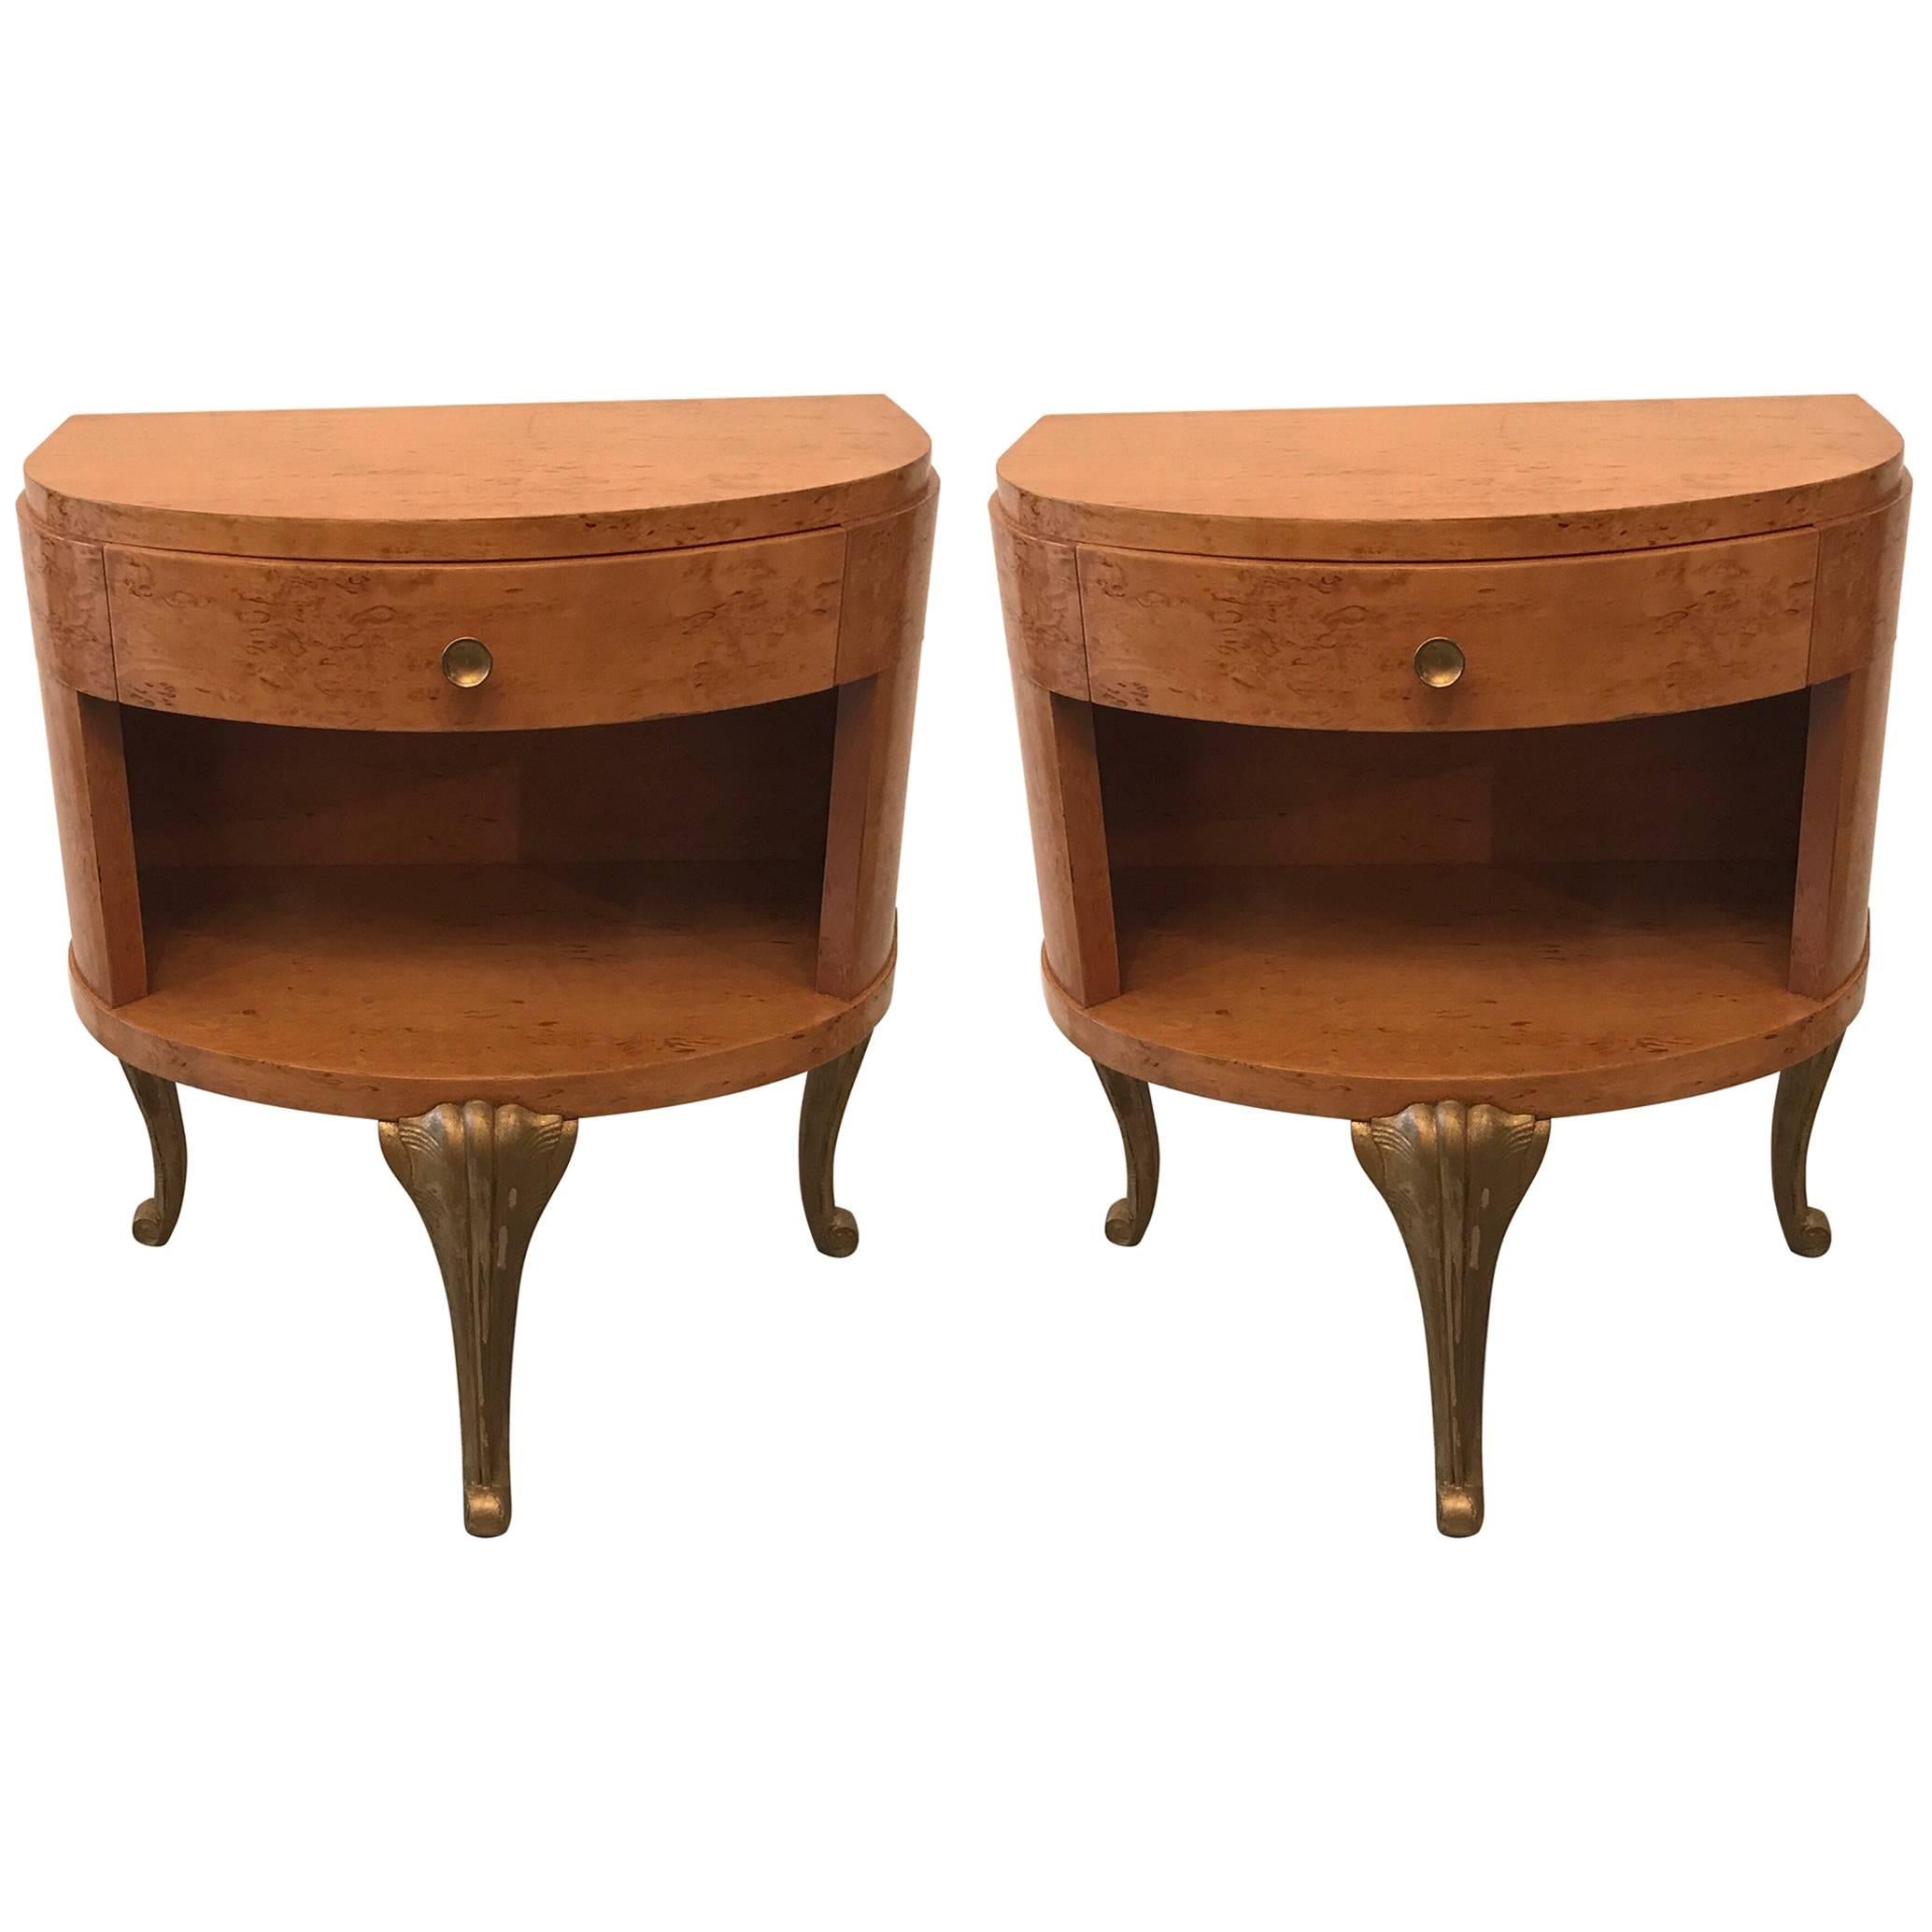 Pair of Blonde and Parcel Gilt Nightstands